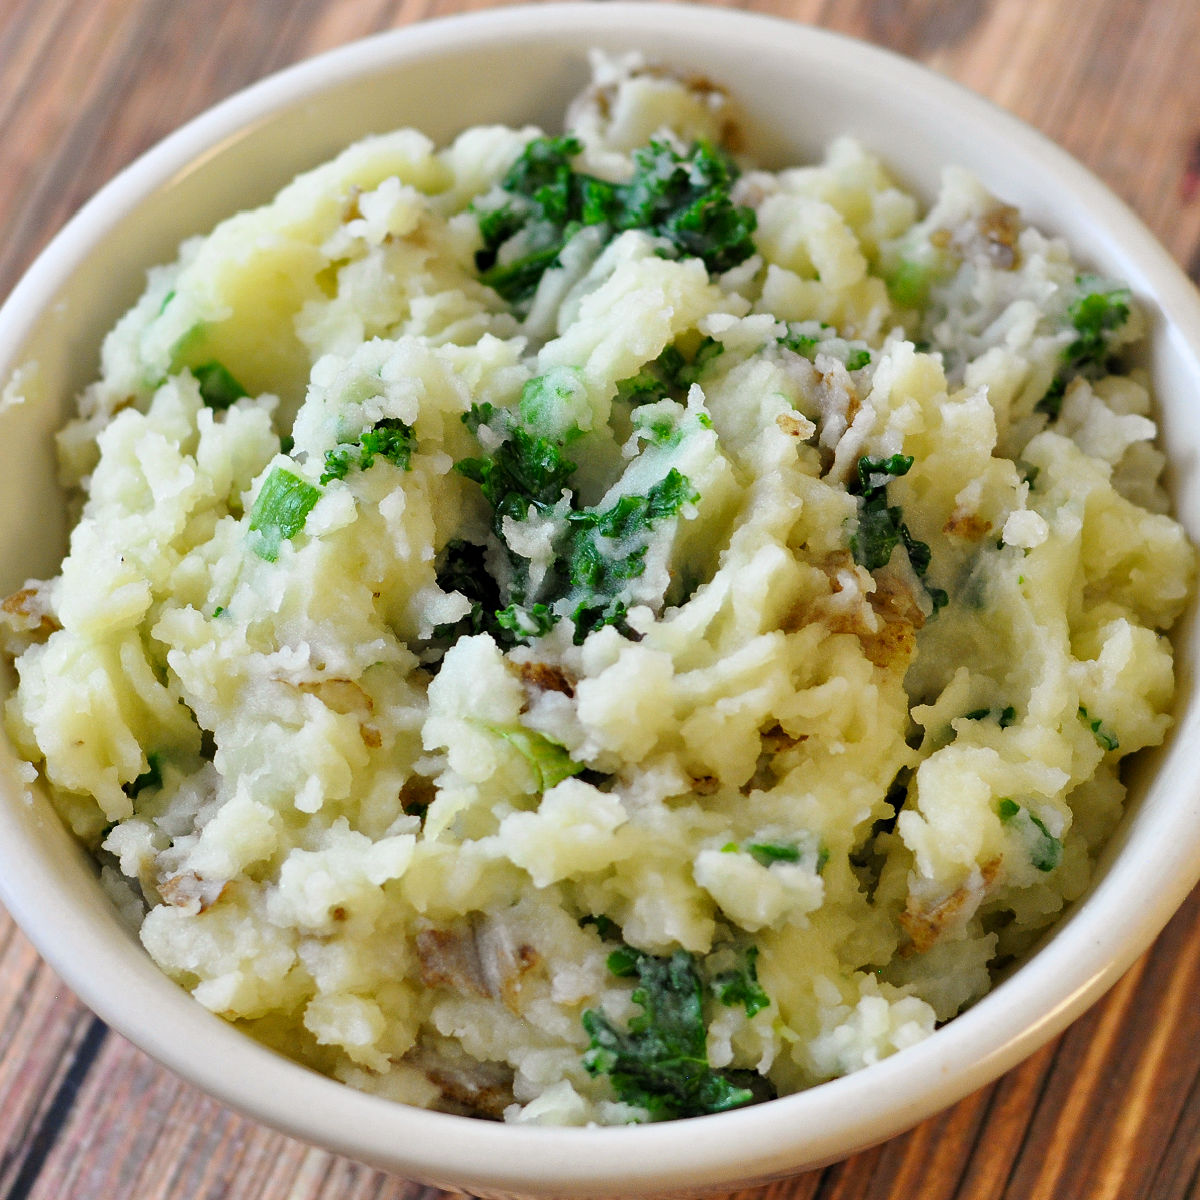 Close up of Irish Colcannon (mashed potatoes and kale) in a ceramic bowl